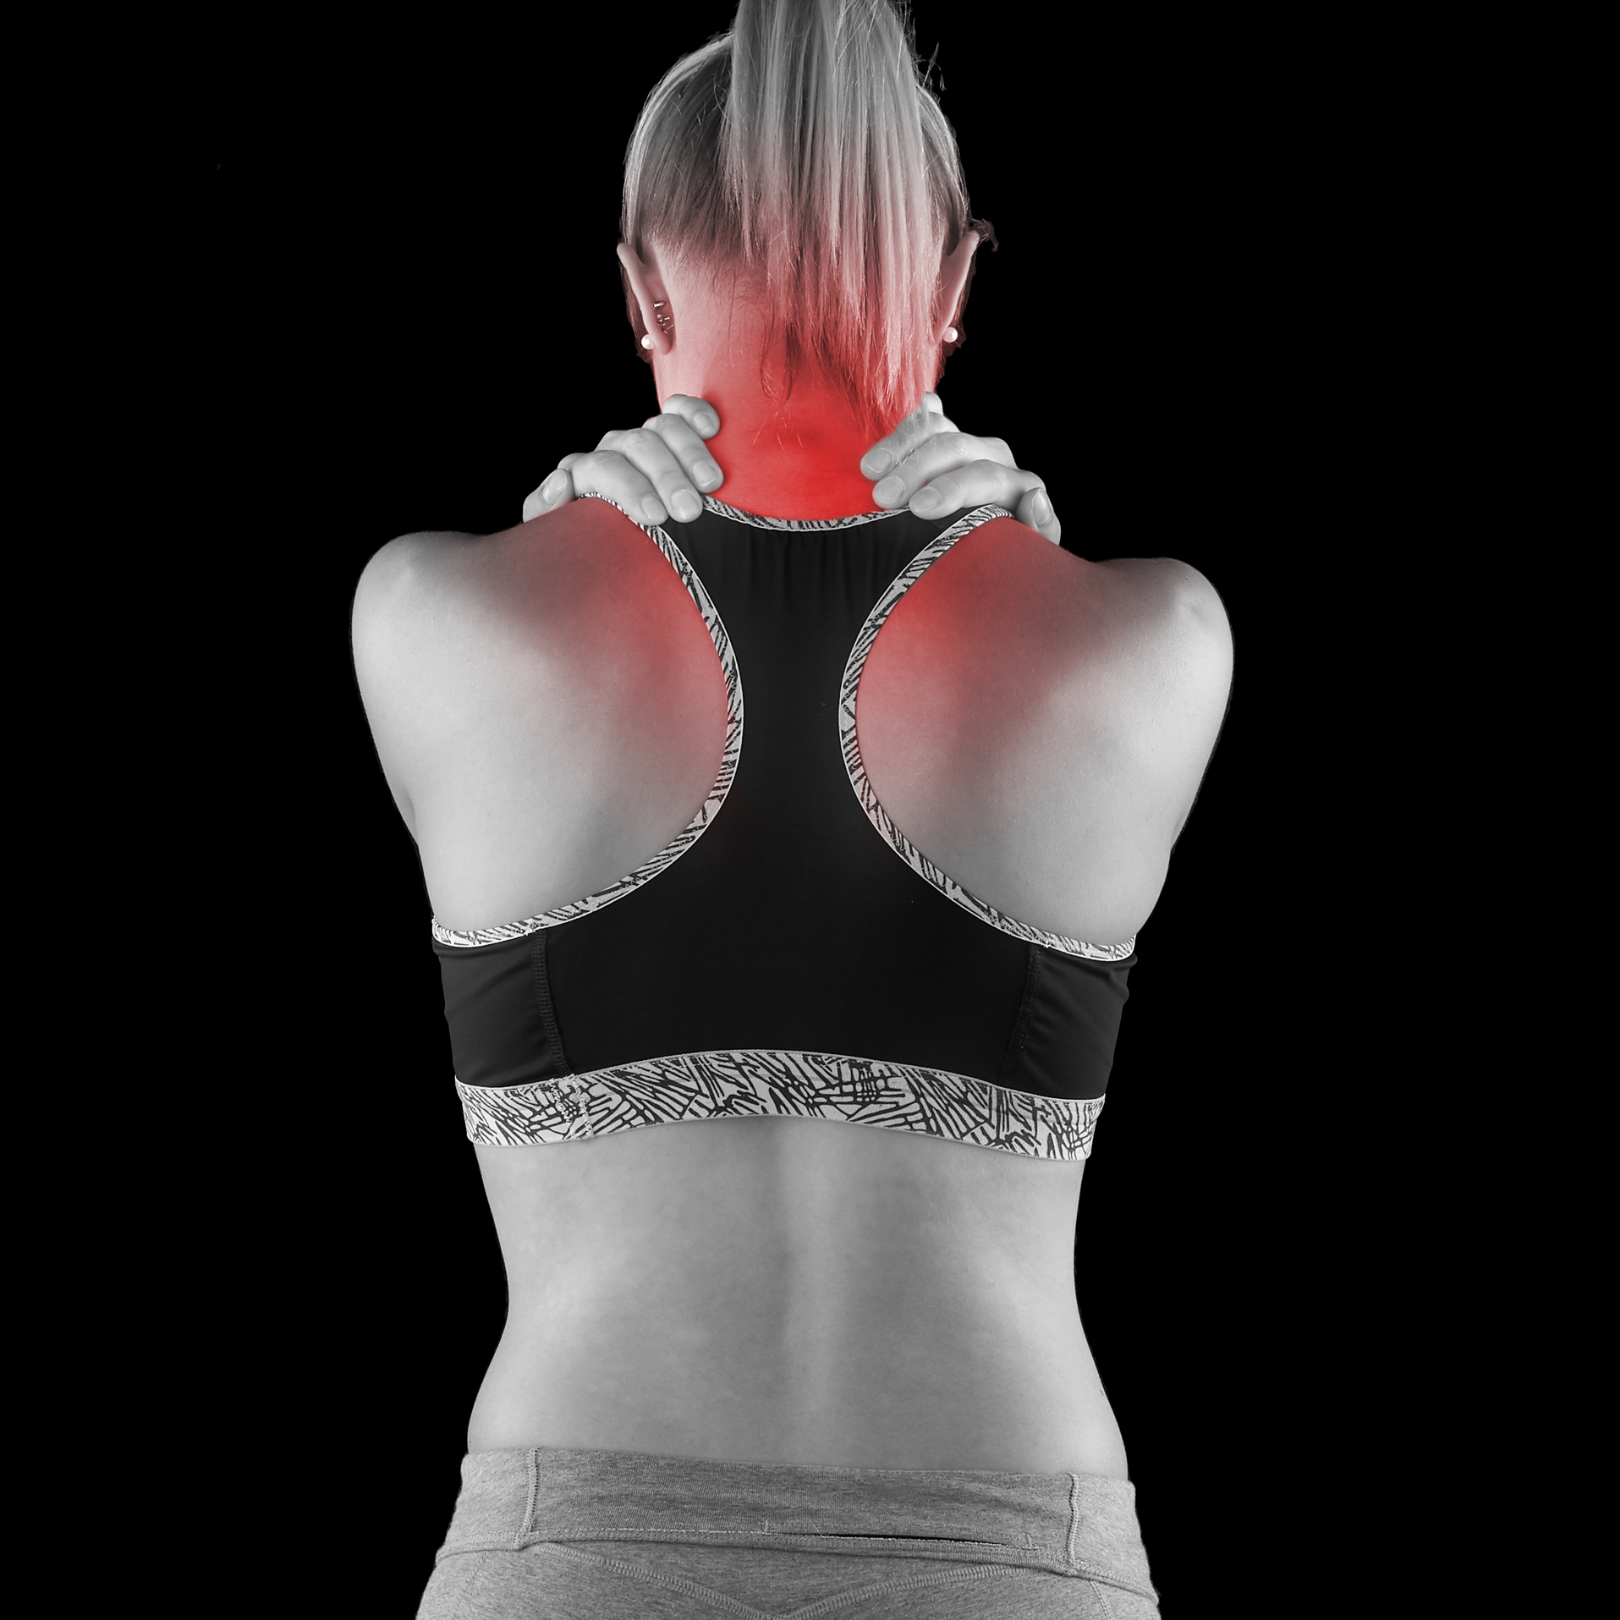 Can wearing bras cause shoulder pain? If so, what bras are best